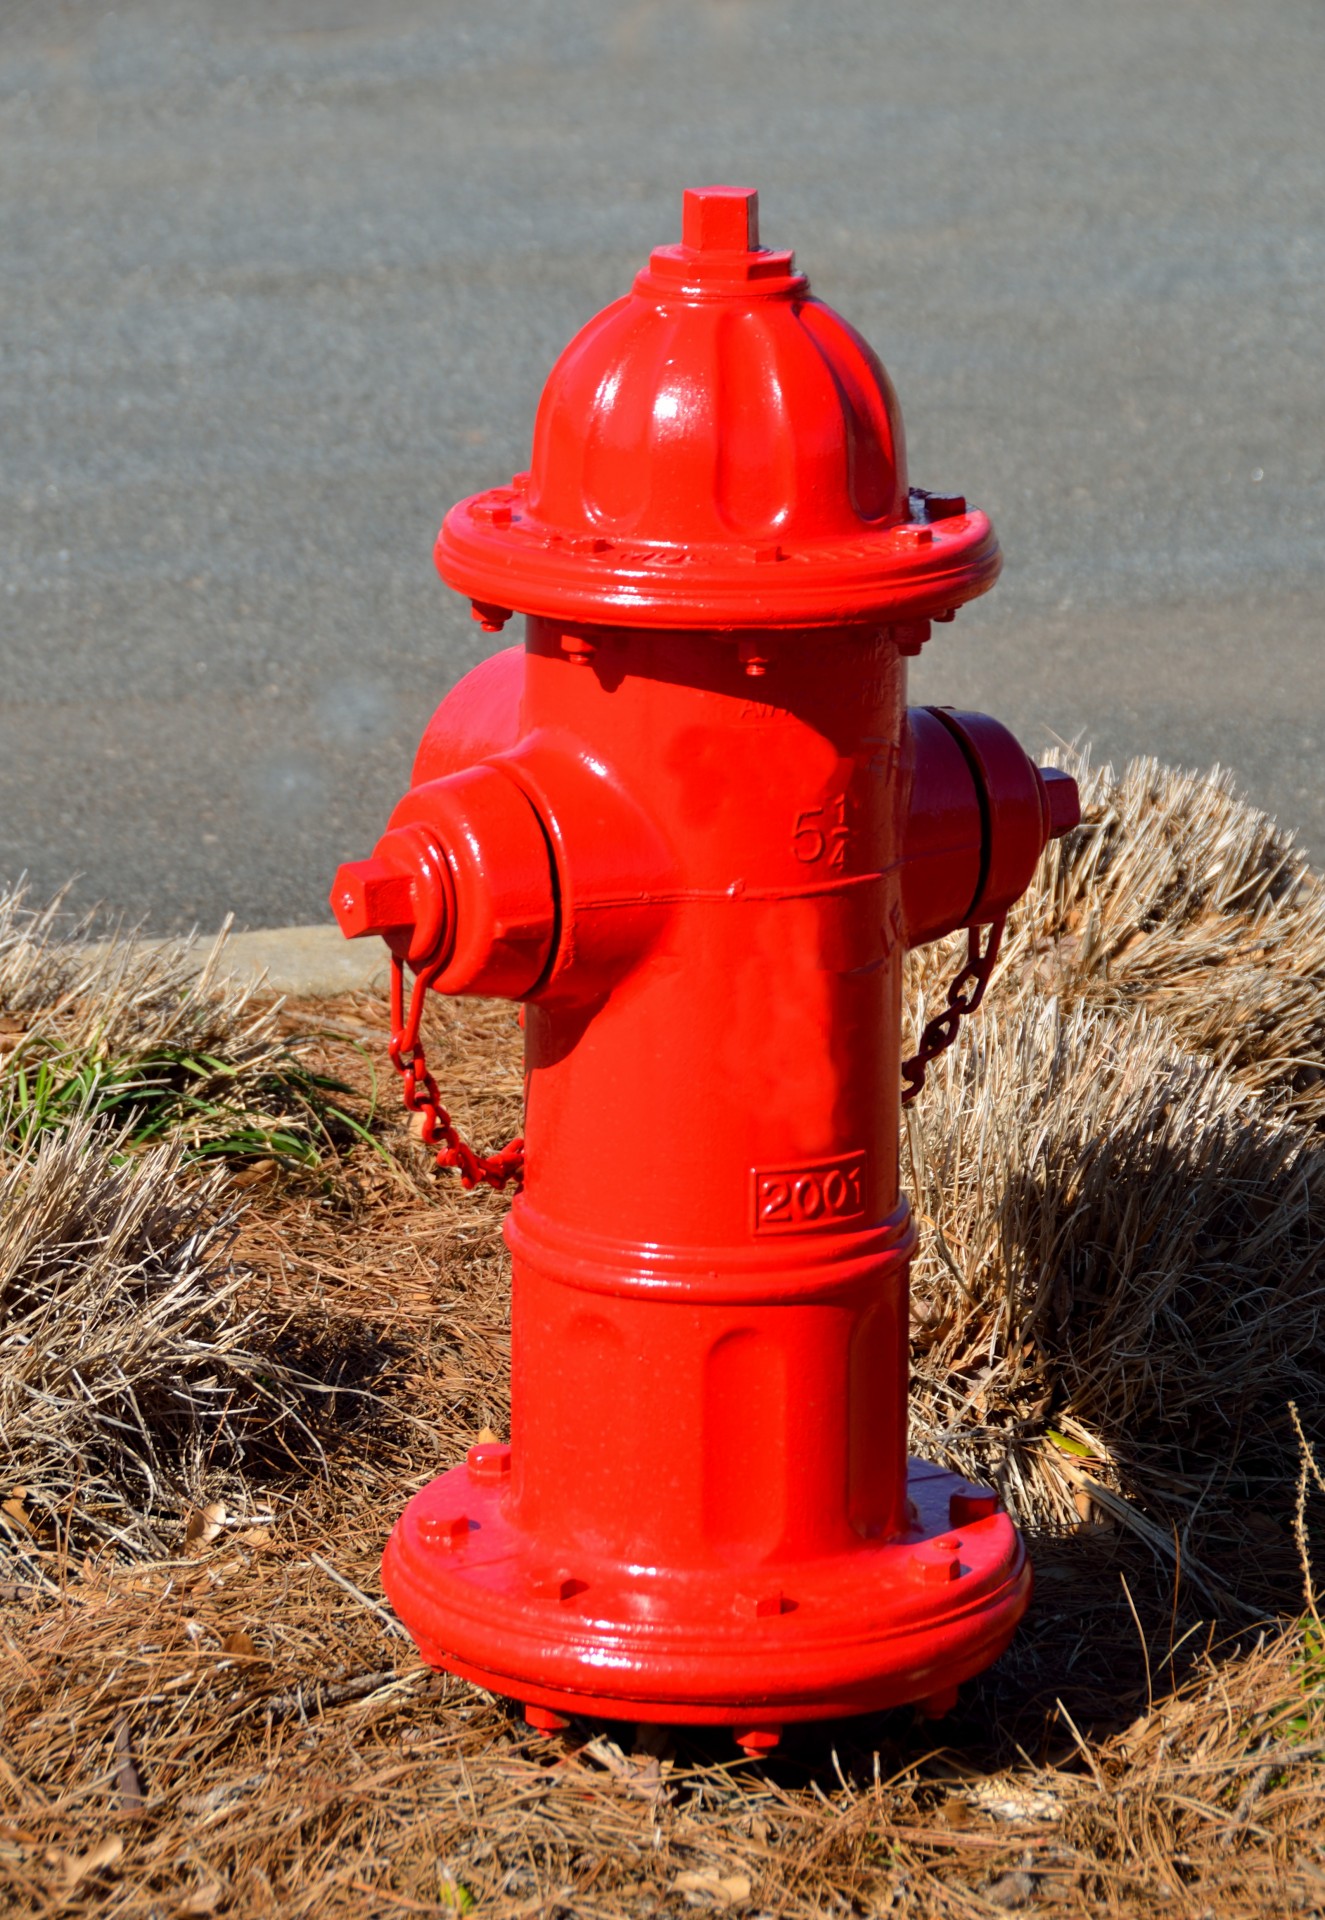 red fire hydrant safety free photo